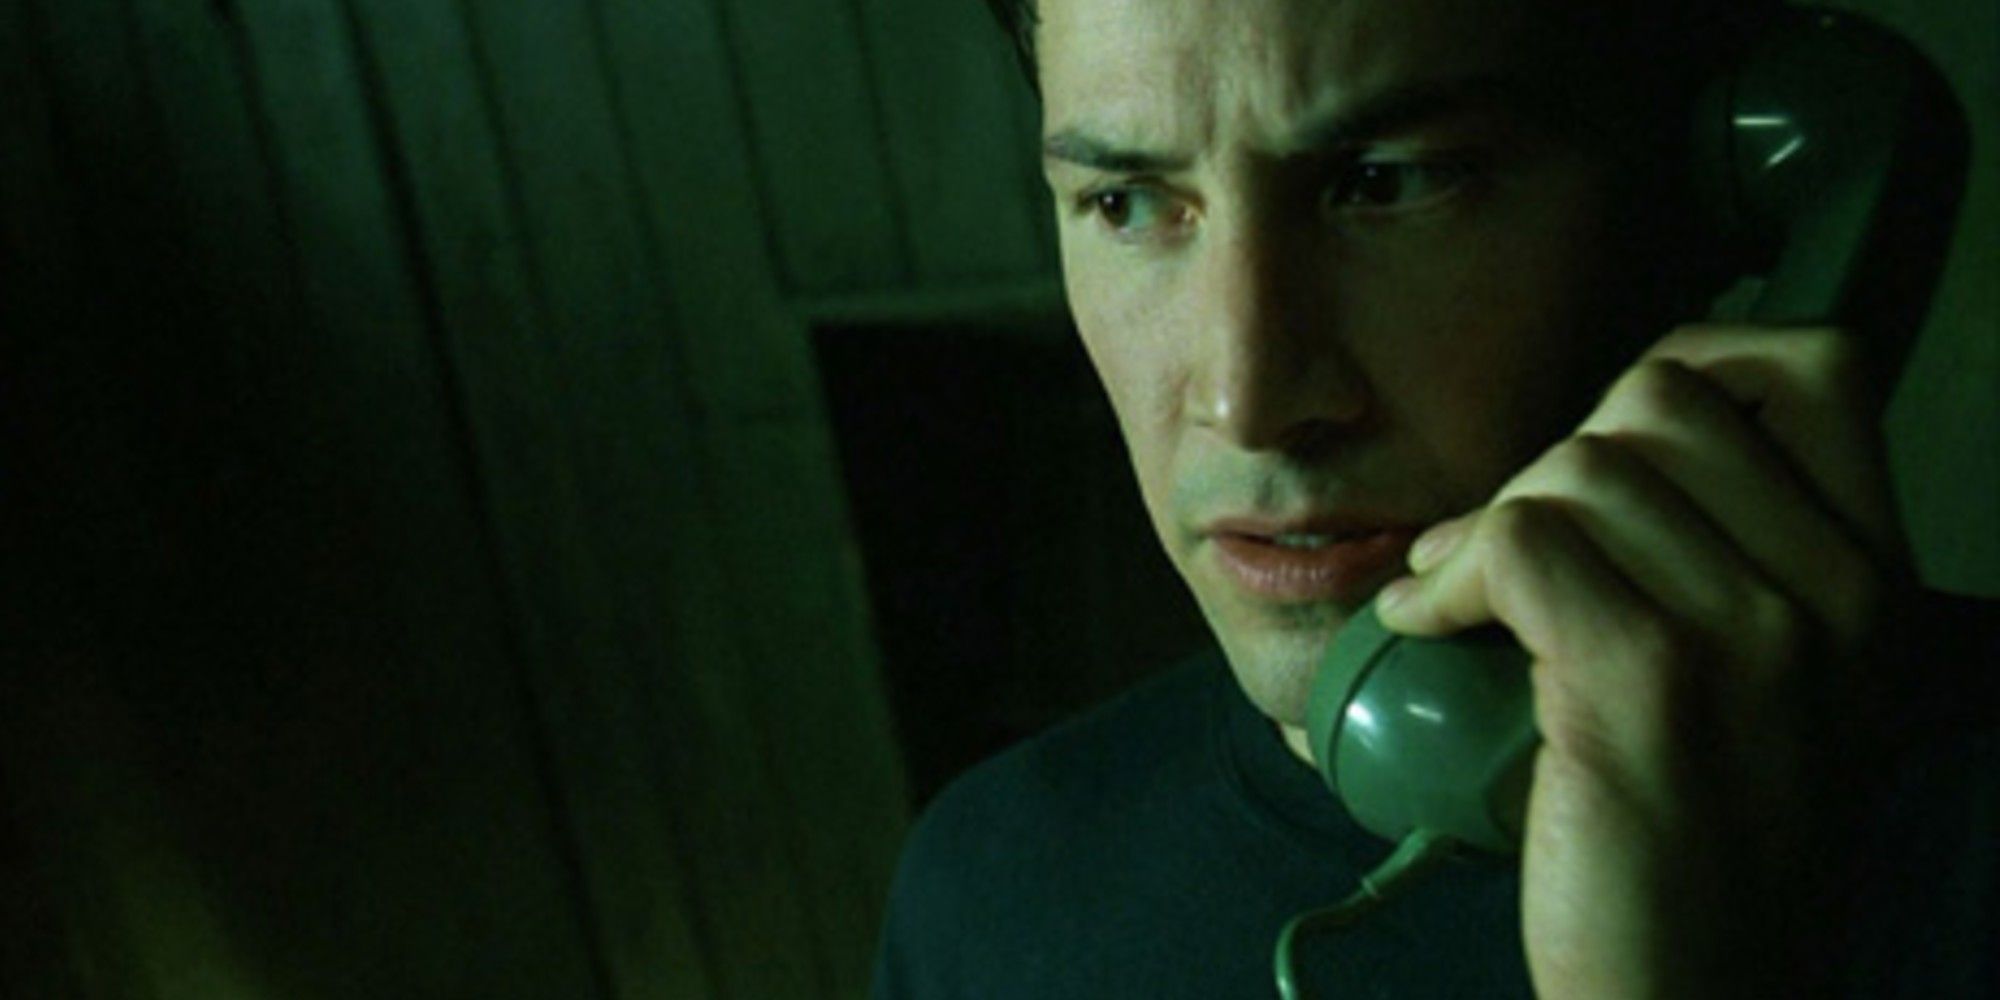 An image of Neo on the phone in The Matrix